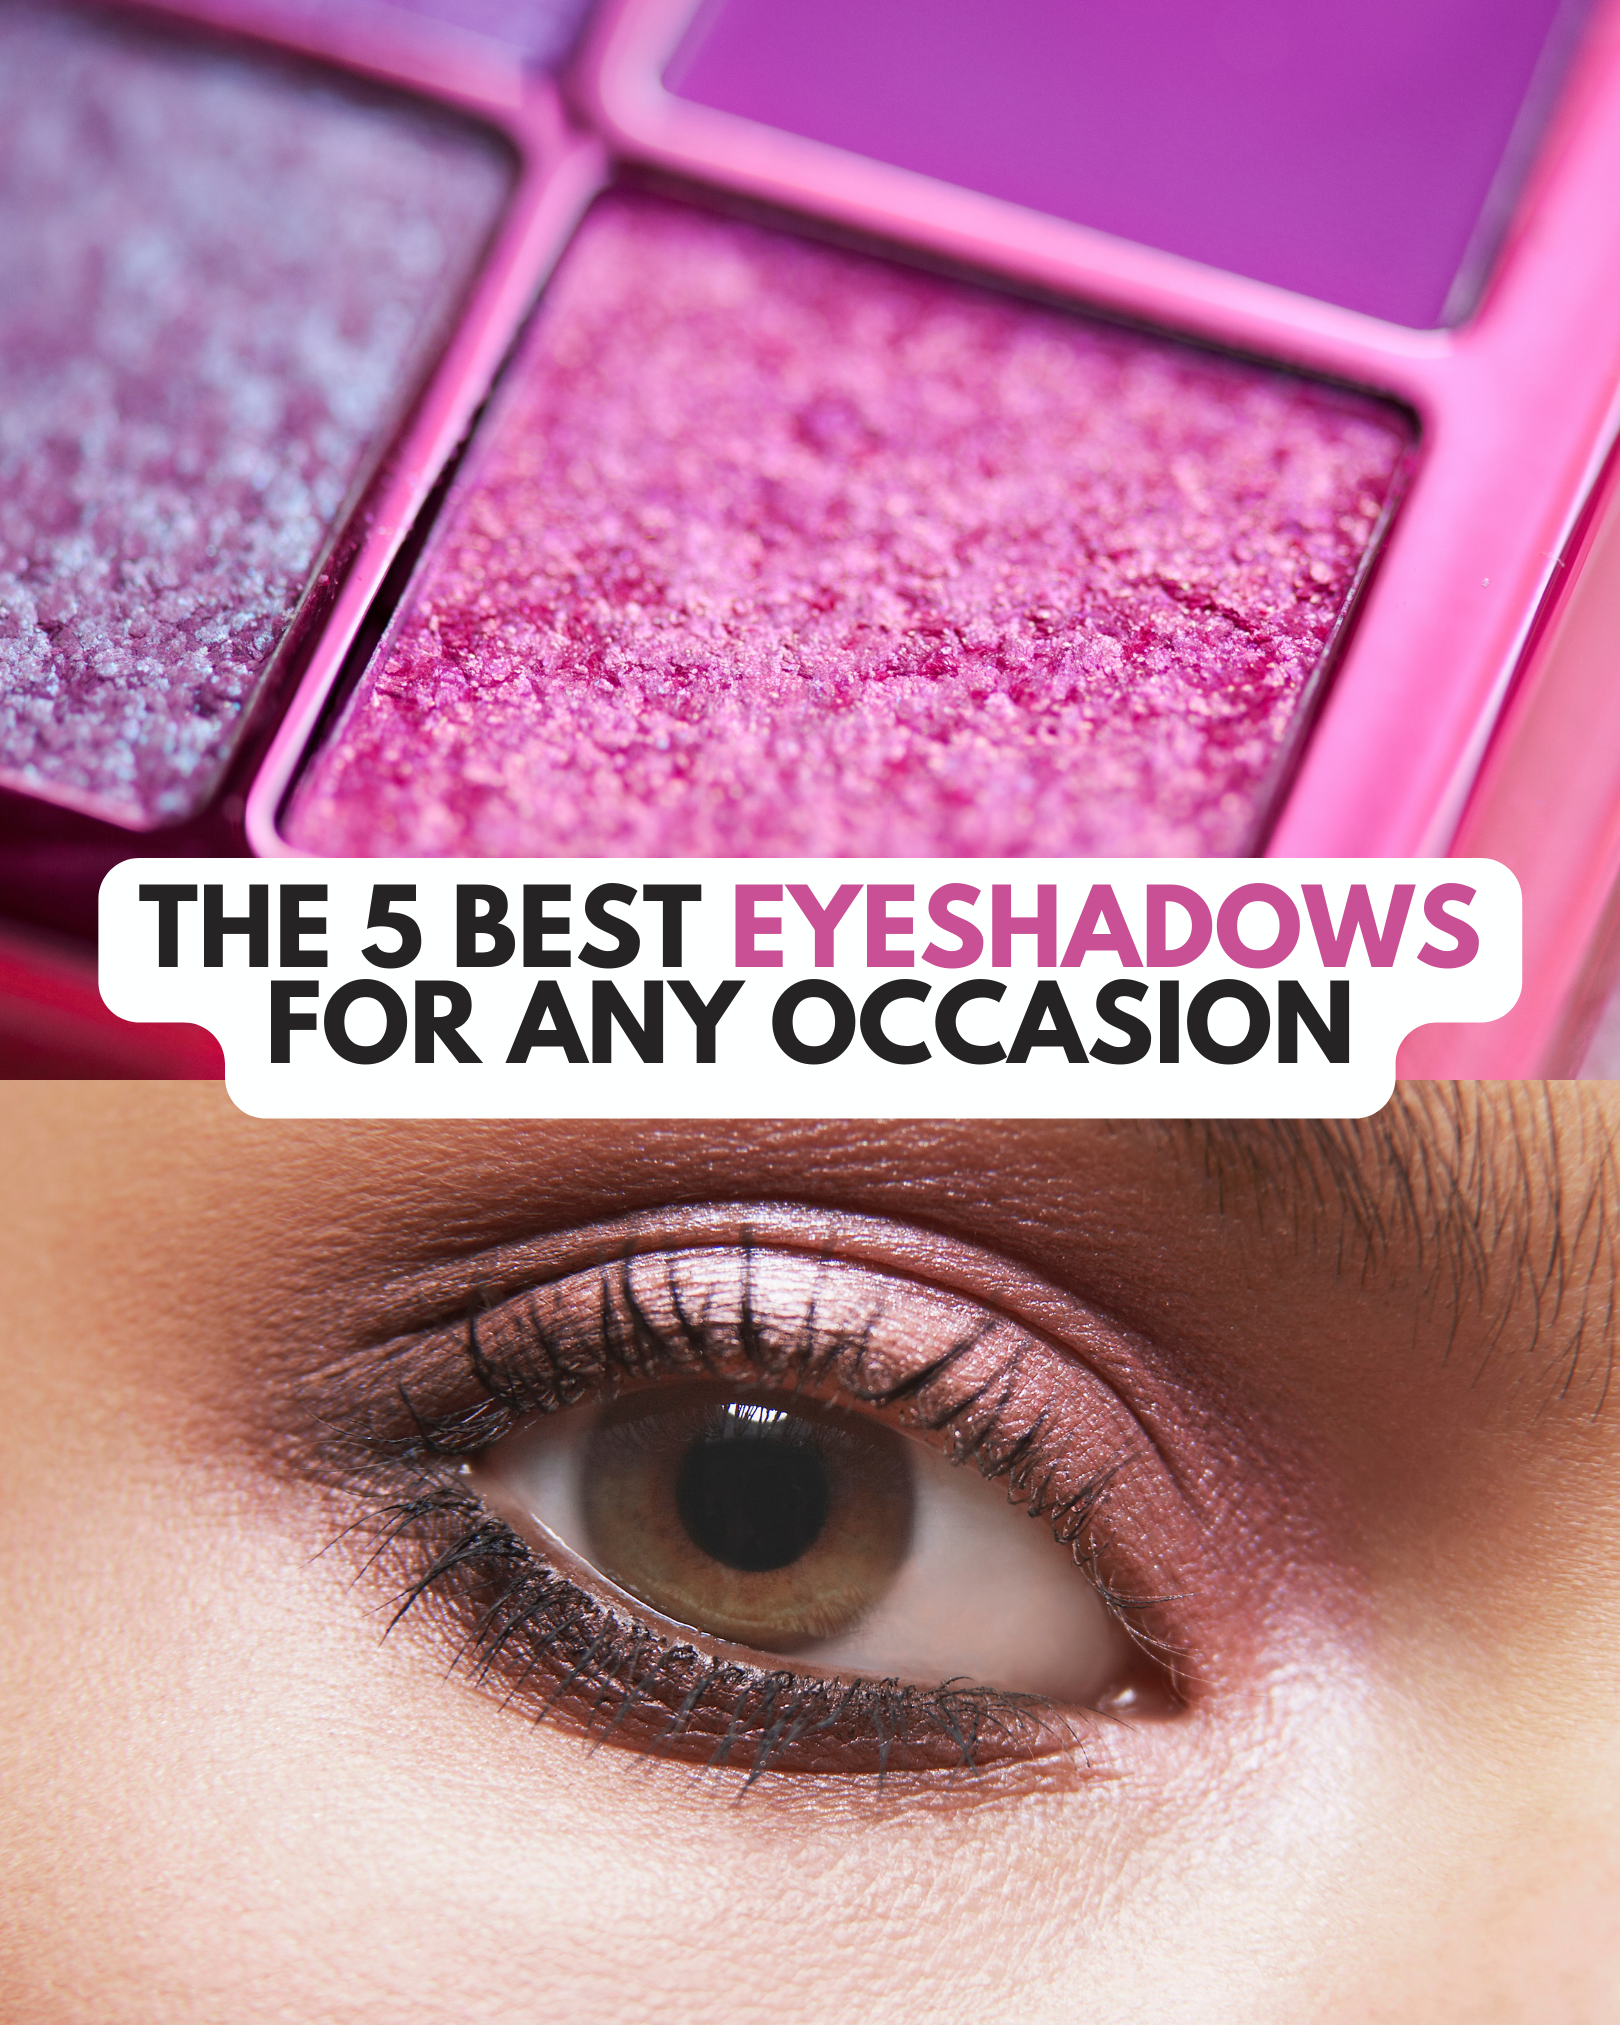 Find Your Perfect Eyeshadow Match: The 5 Best Eyeshadows for Any Occasion